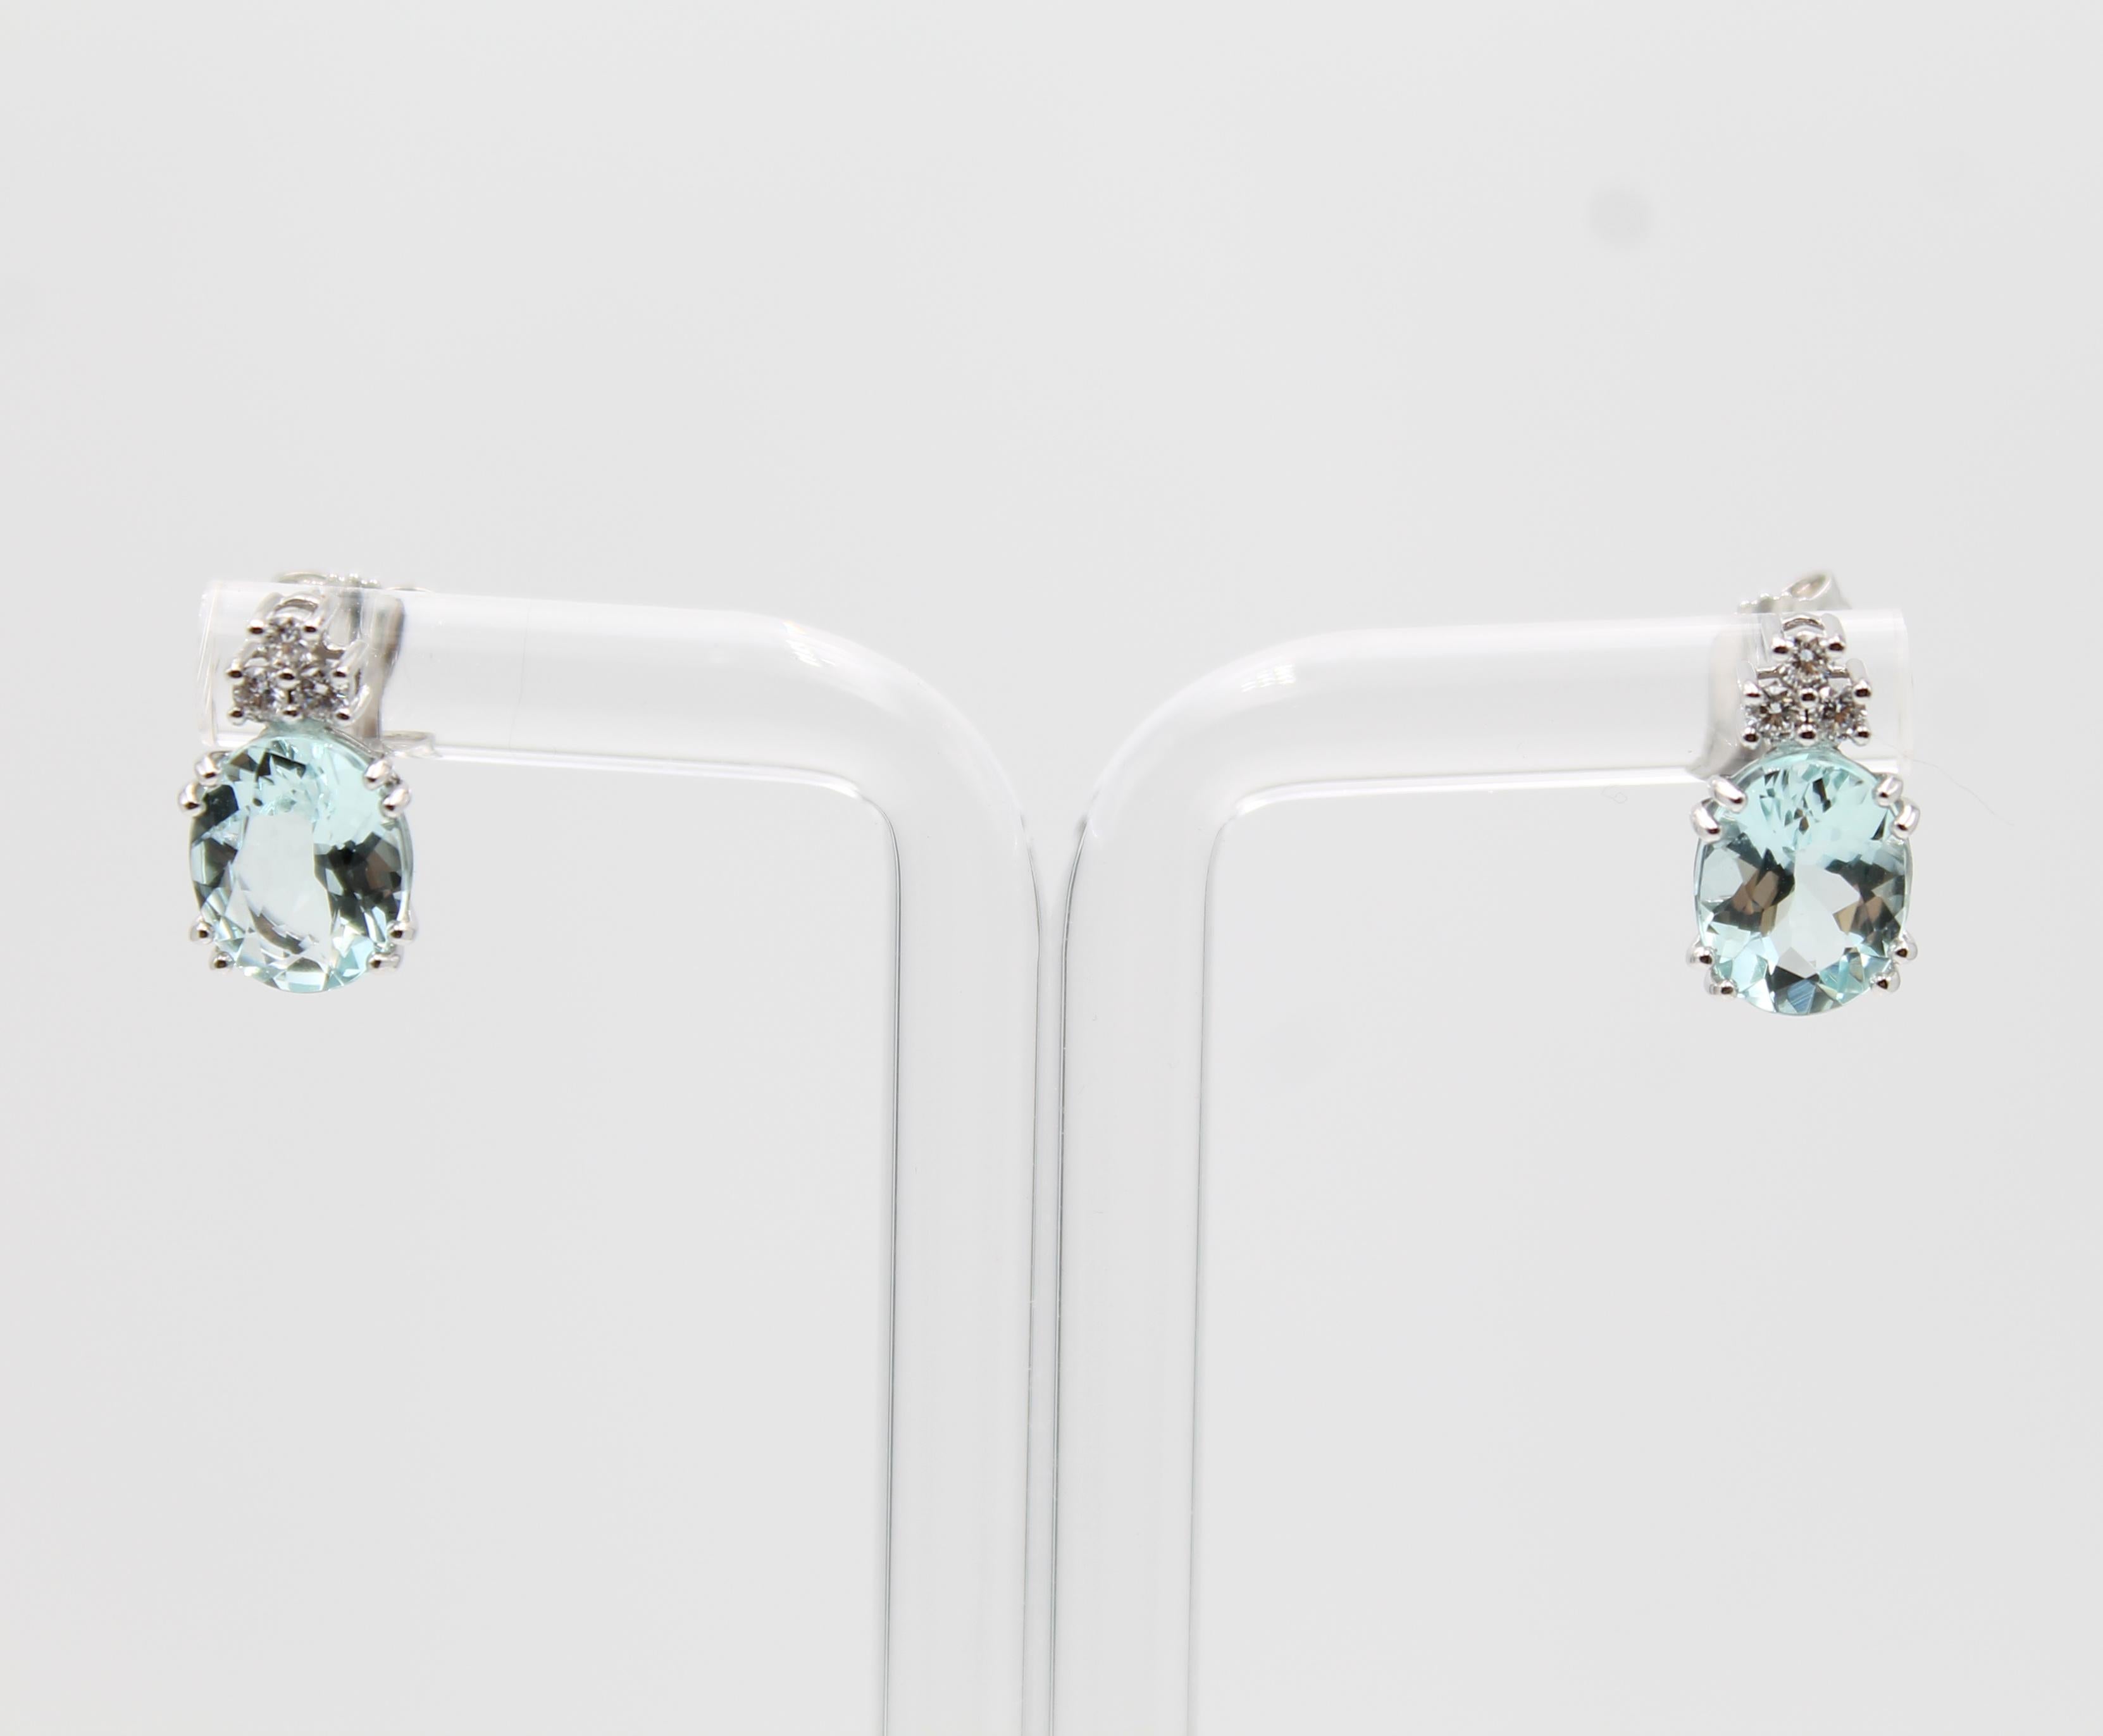 18kt white gold earrings with oval aquamarines topped with diamonds arranged in a triangle.
The earrings are handmade by Italian artisans, and contain:
- 2 aquamarines, faceted oval cut, size 8x6 mm, total carats 4.02
- 6 diamonds, brilliant cut,